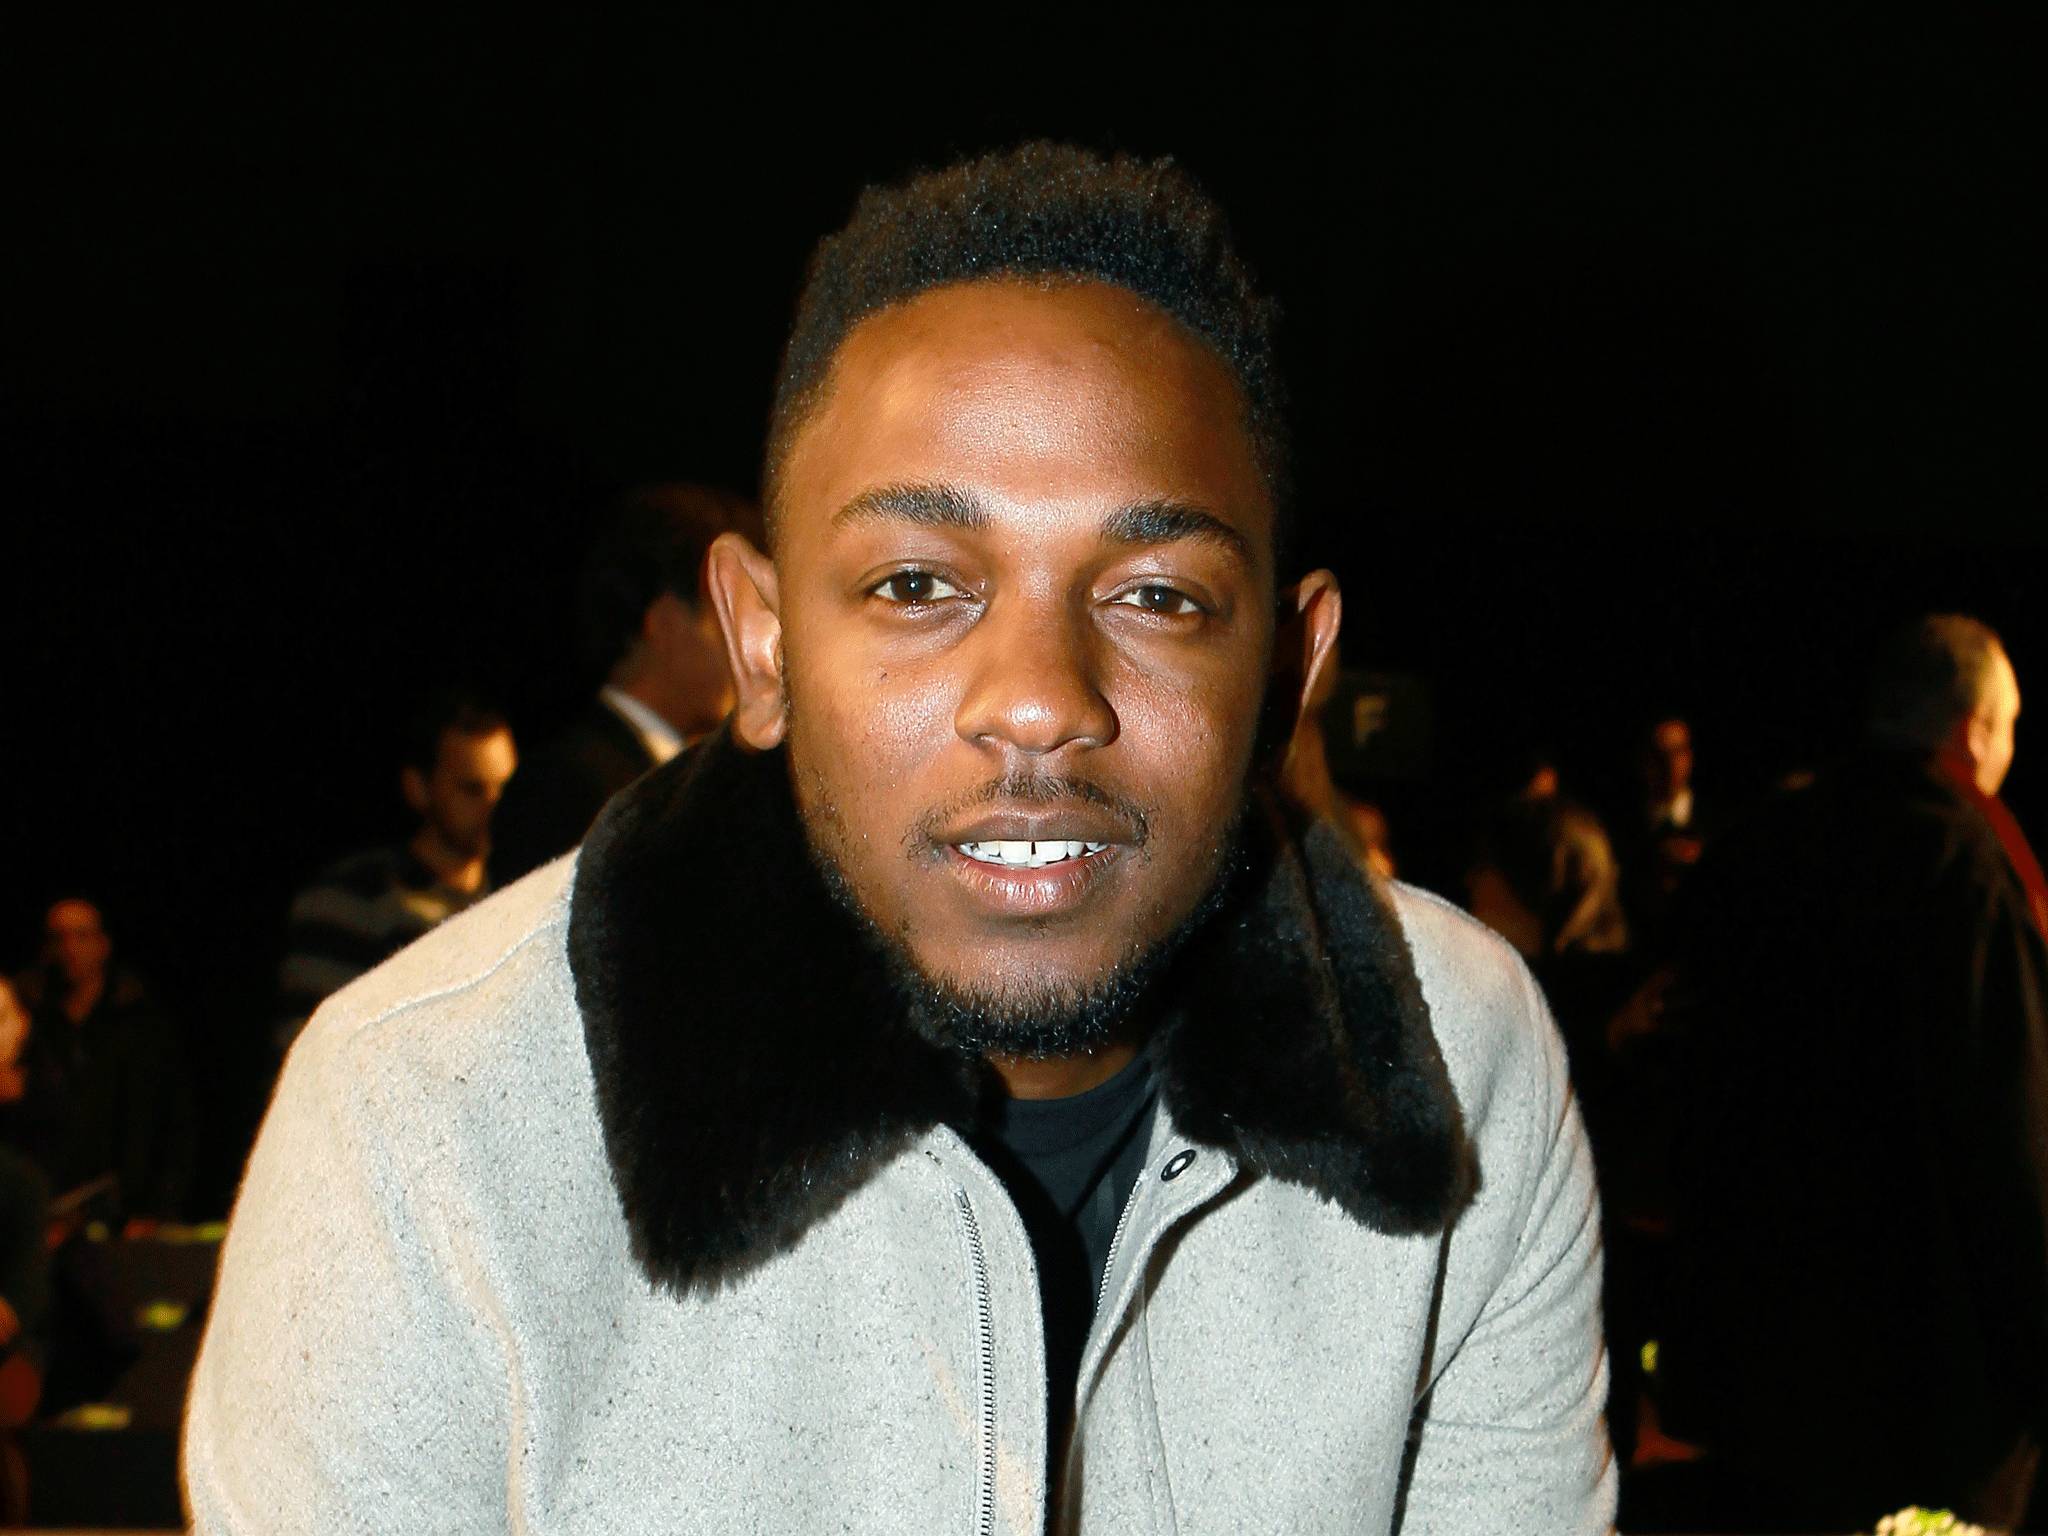 Kendrick Lamar called for more hip-hop at the Grammys